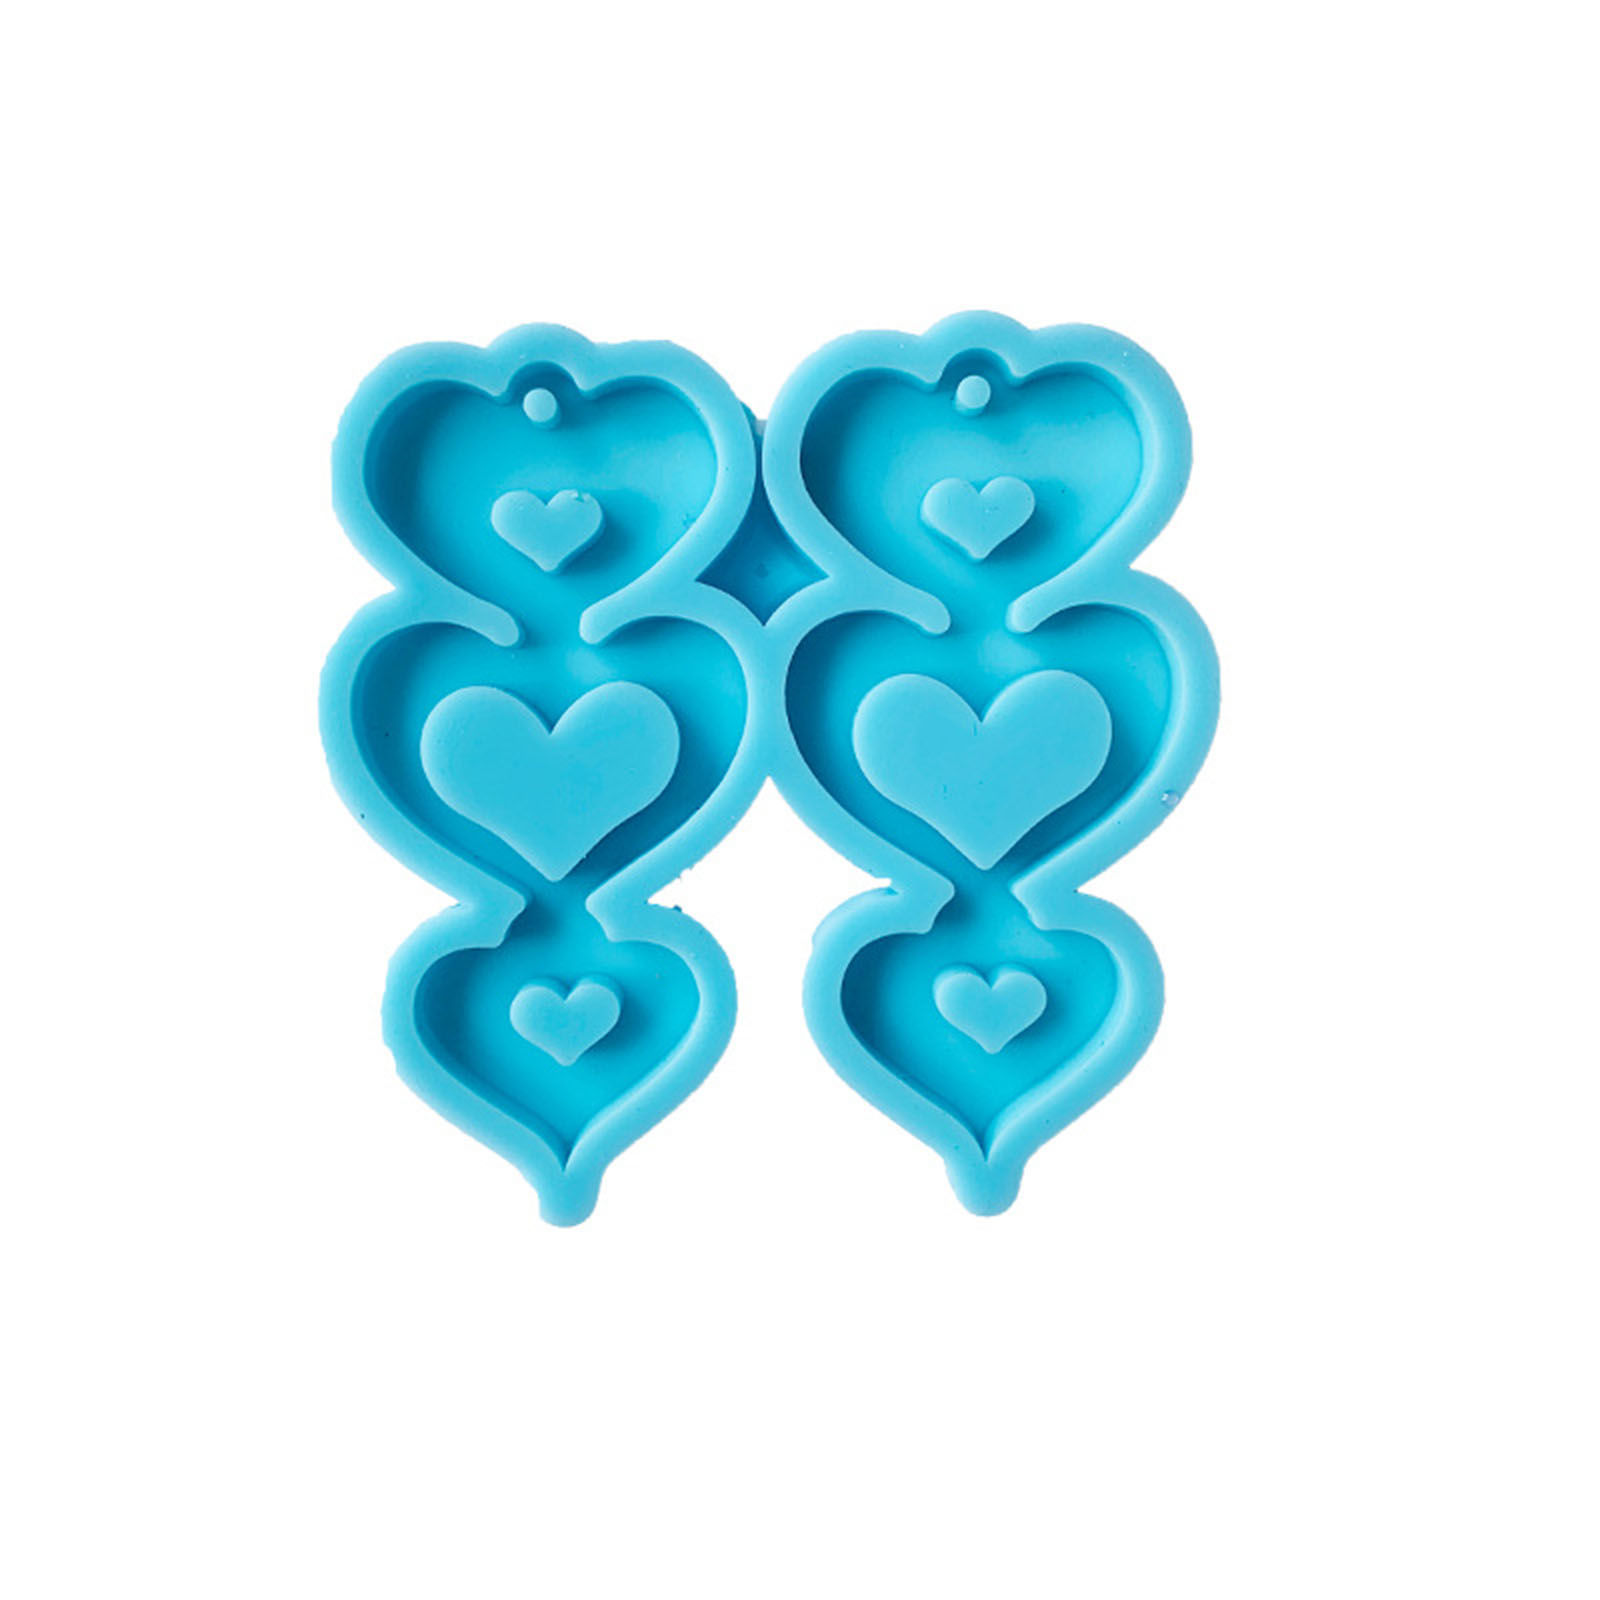 Picture of Silicone Resin Mold For Jewelry Making Pendant Earrings Keychain Heart Blue 7.5cm x 7cm, 1 Piece